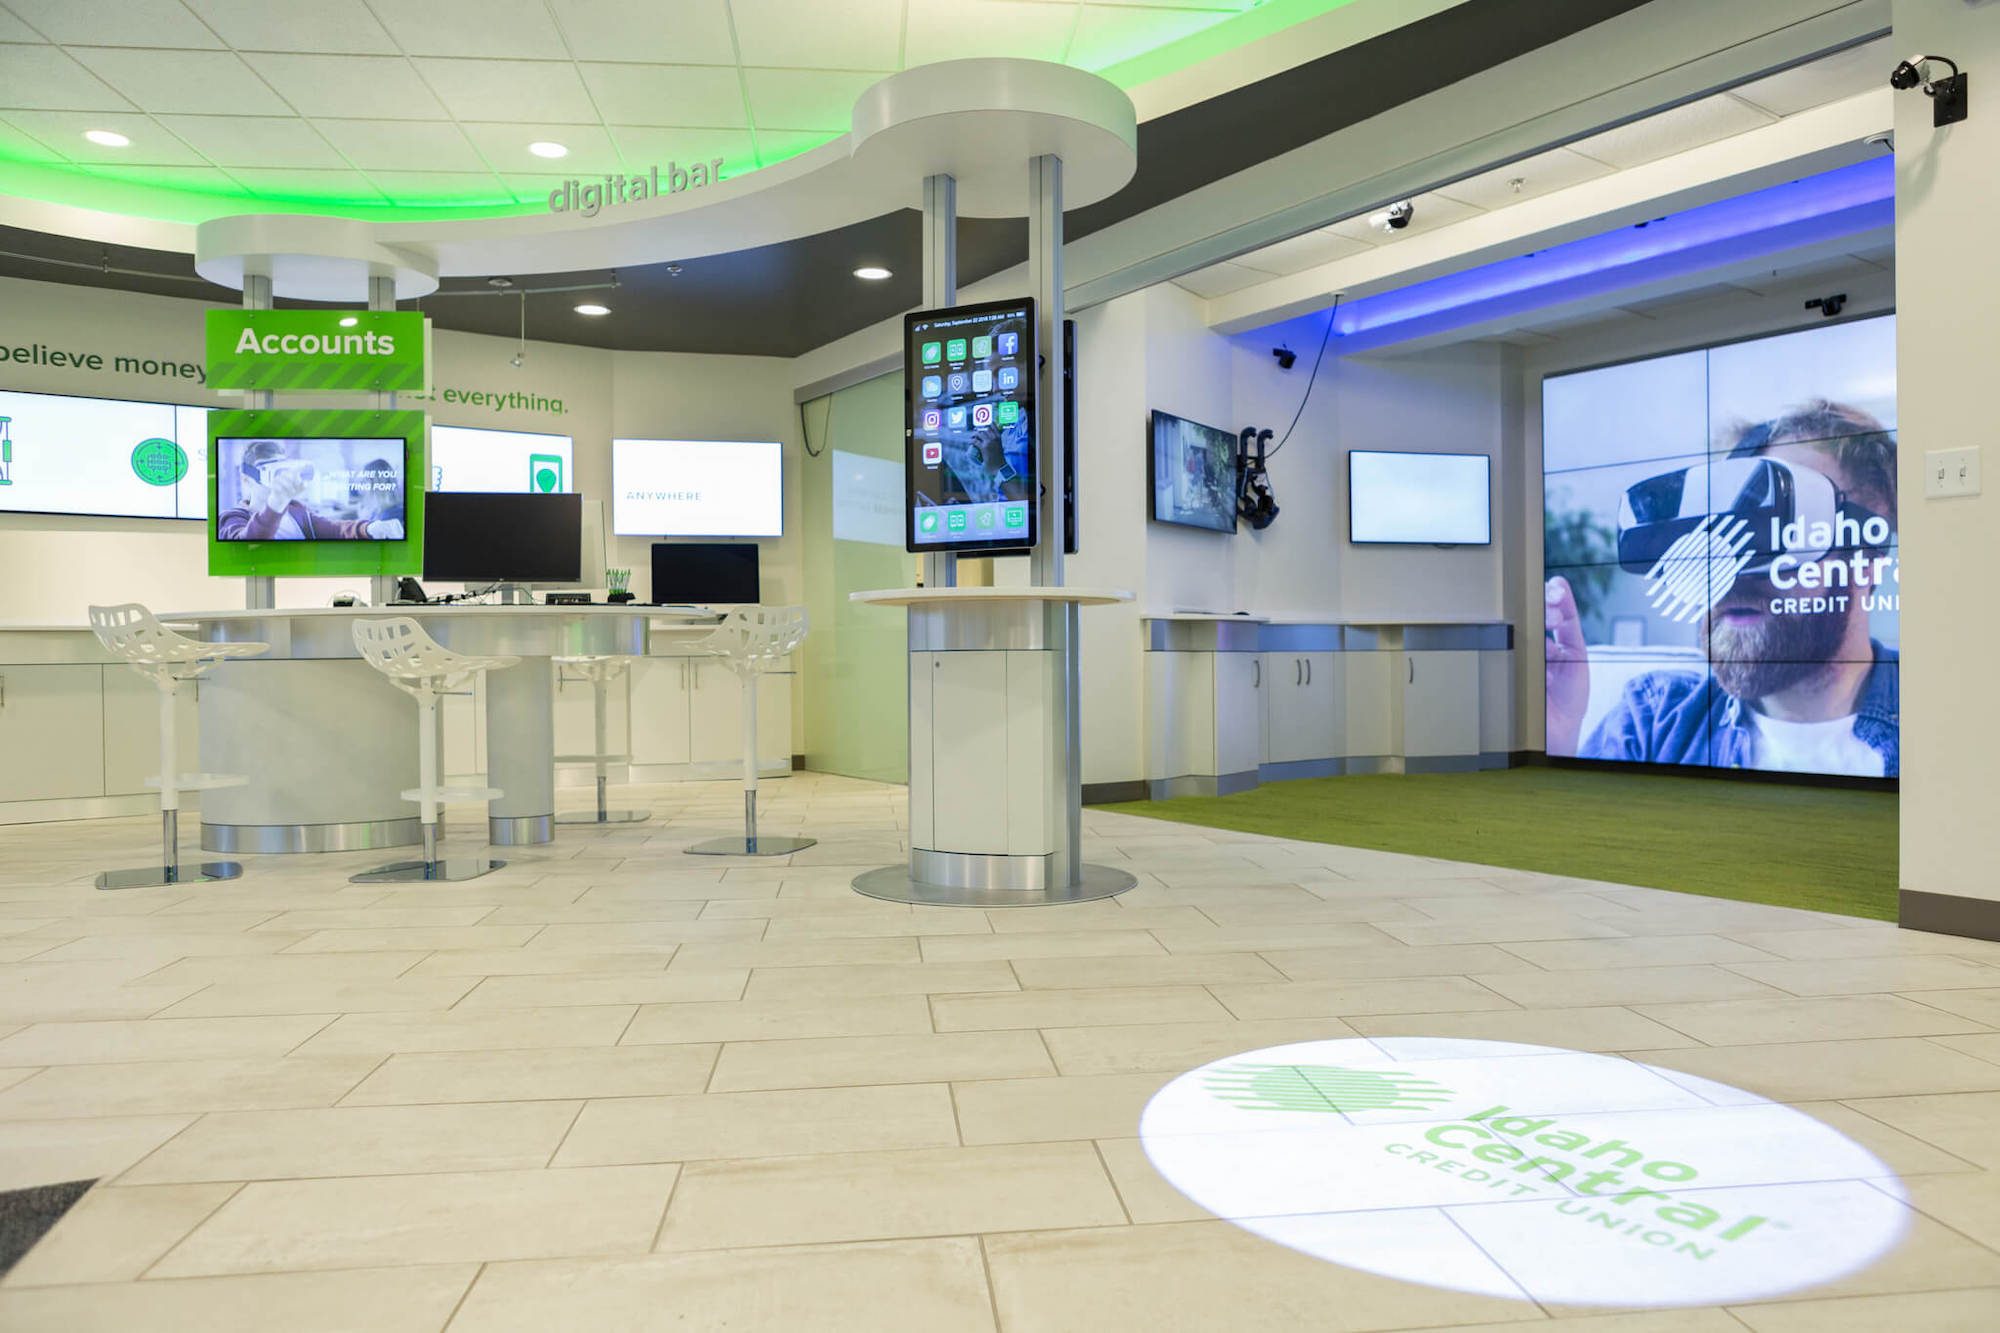 5 Benefits of Adding Digital Signage to Your Bank or Credit Union